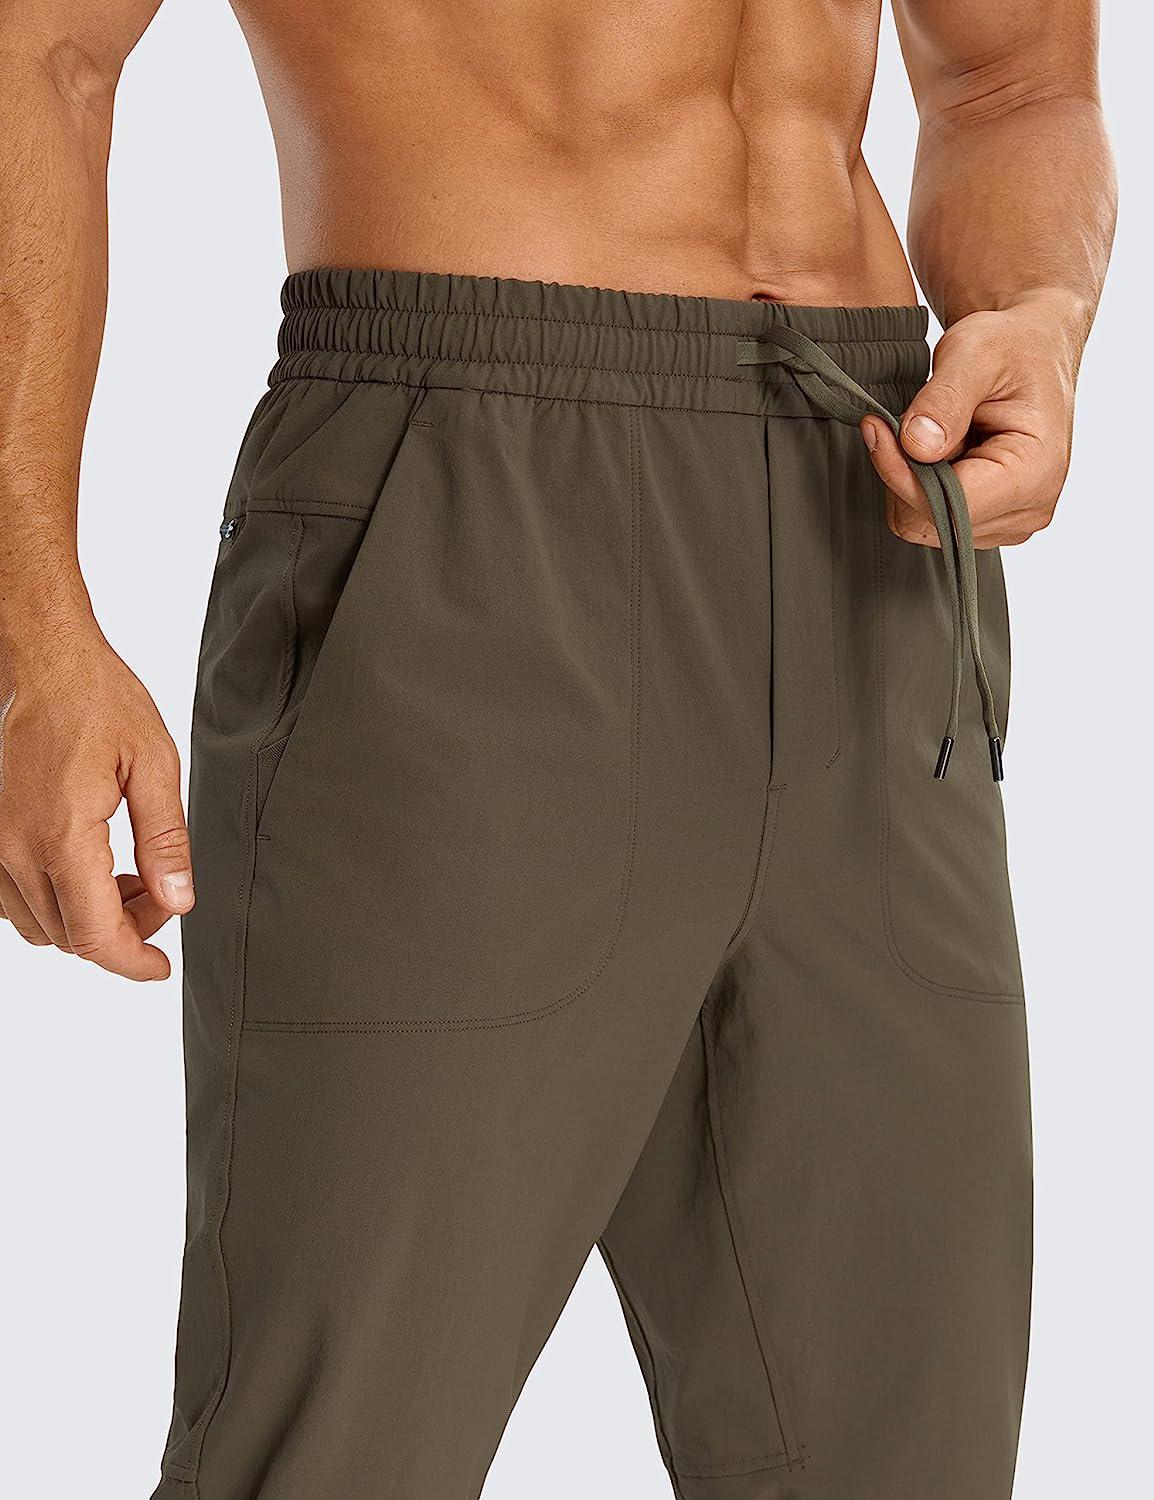 Quick Dry Workout Pants 30